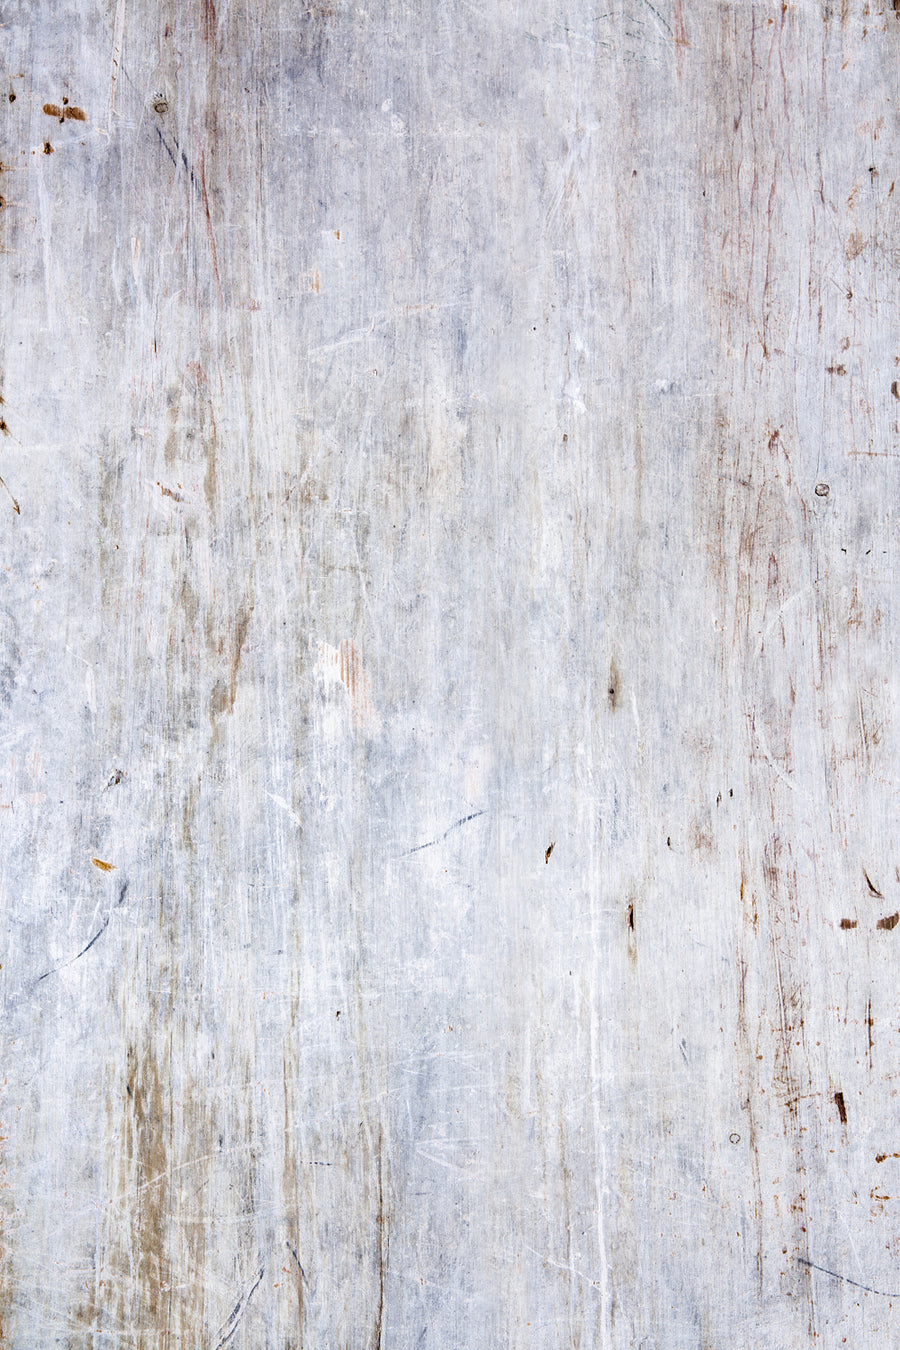 Weathered warm gray wood photography surface